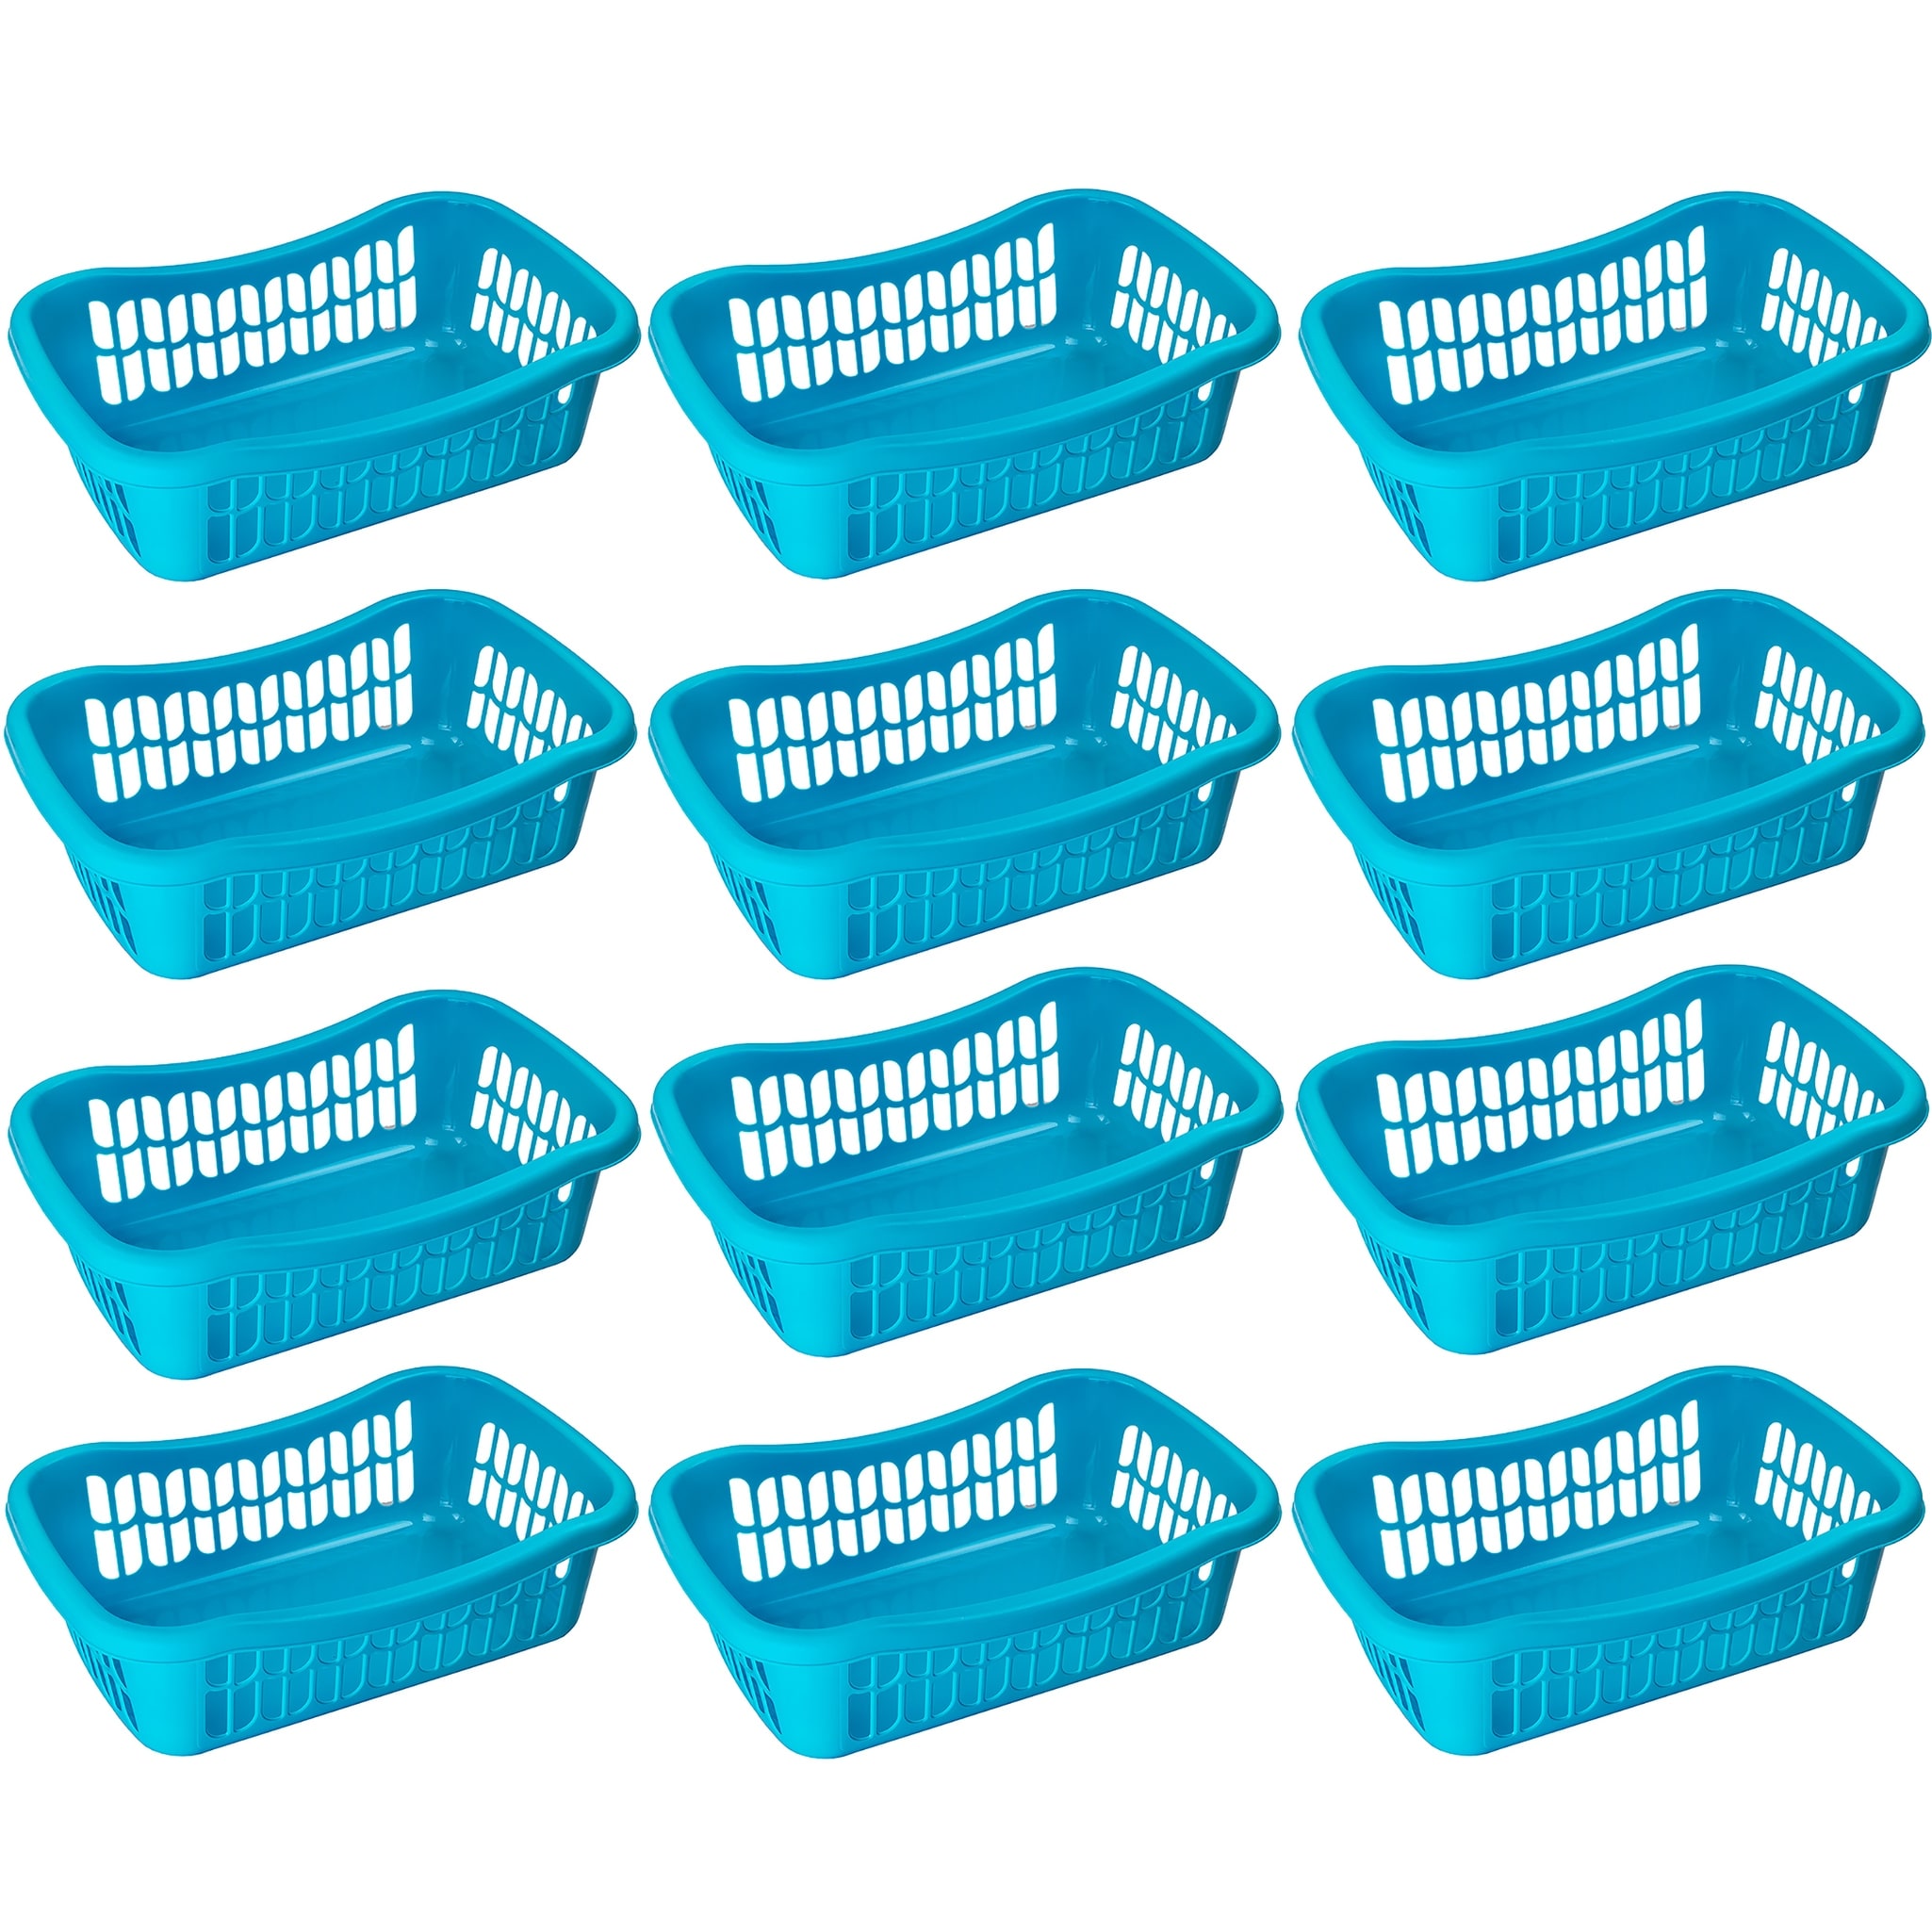 https://ak1.ostkcdn.com/images/products/is/images/direct/e7b76636db88c1b7d01667f6049a610b449c3c06/Large-Plastic-Storage-Basket-for-Organizing-Kitchen-Pantry%2C-Kids-Room%2C-Office.jpg